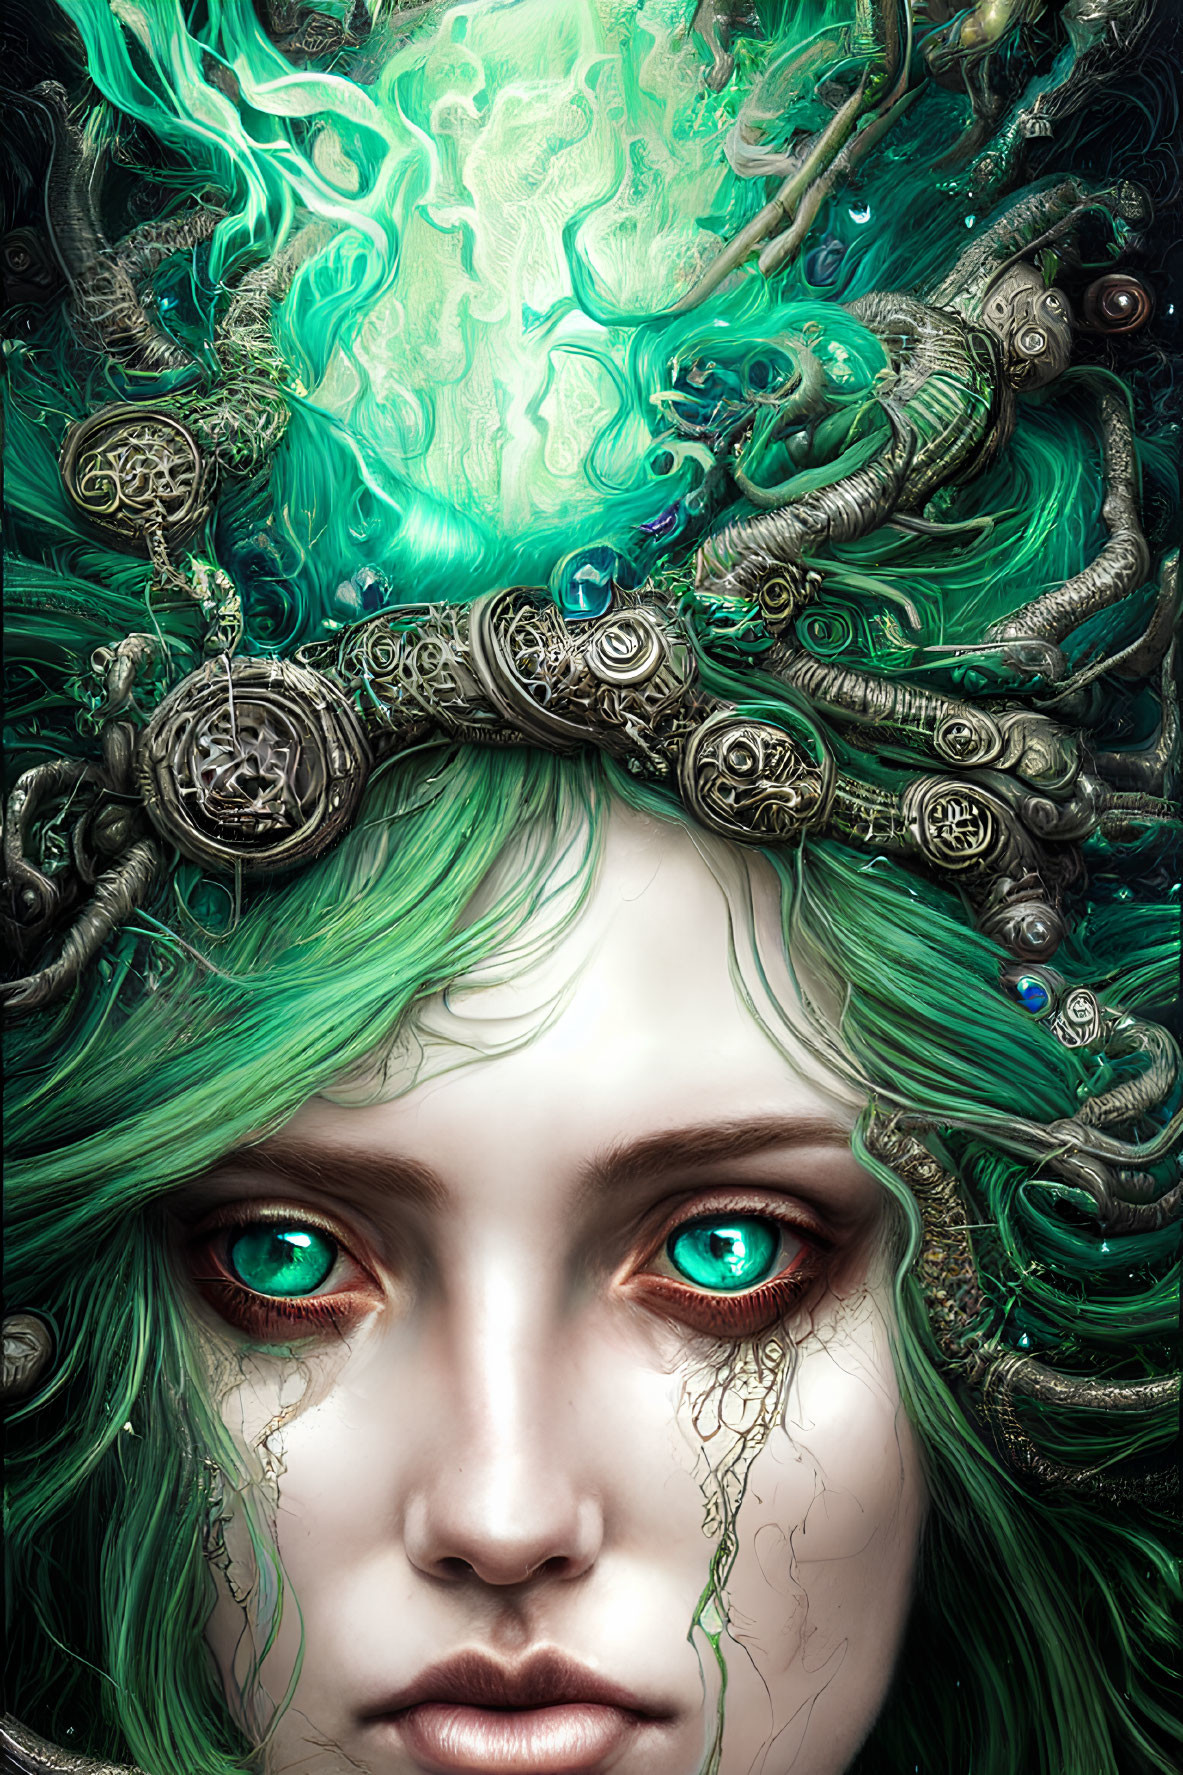 Vibrant digital portrait of woman with green hair and emerald eyes and metallic ornaments in ethereal